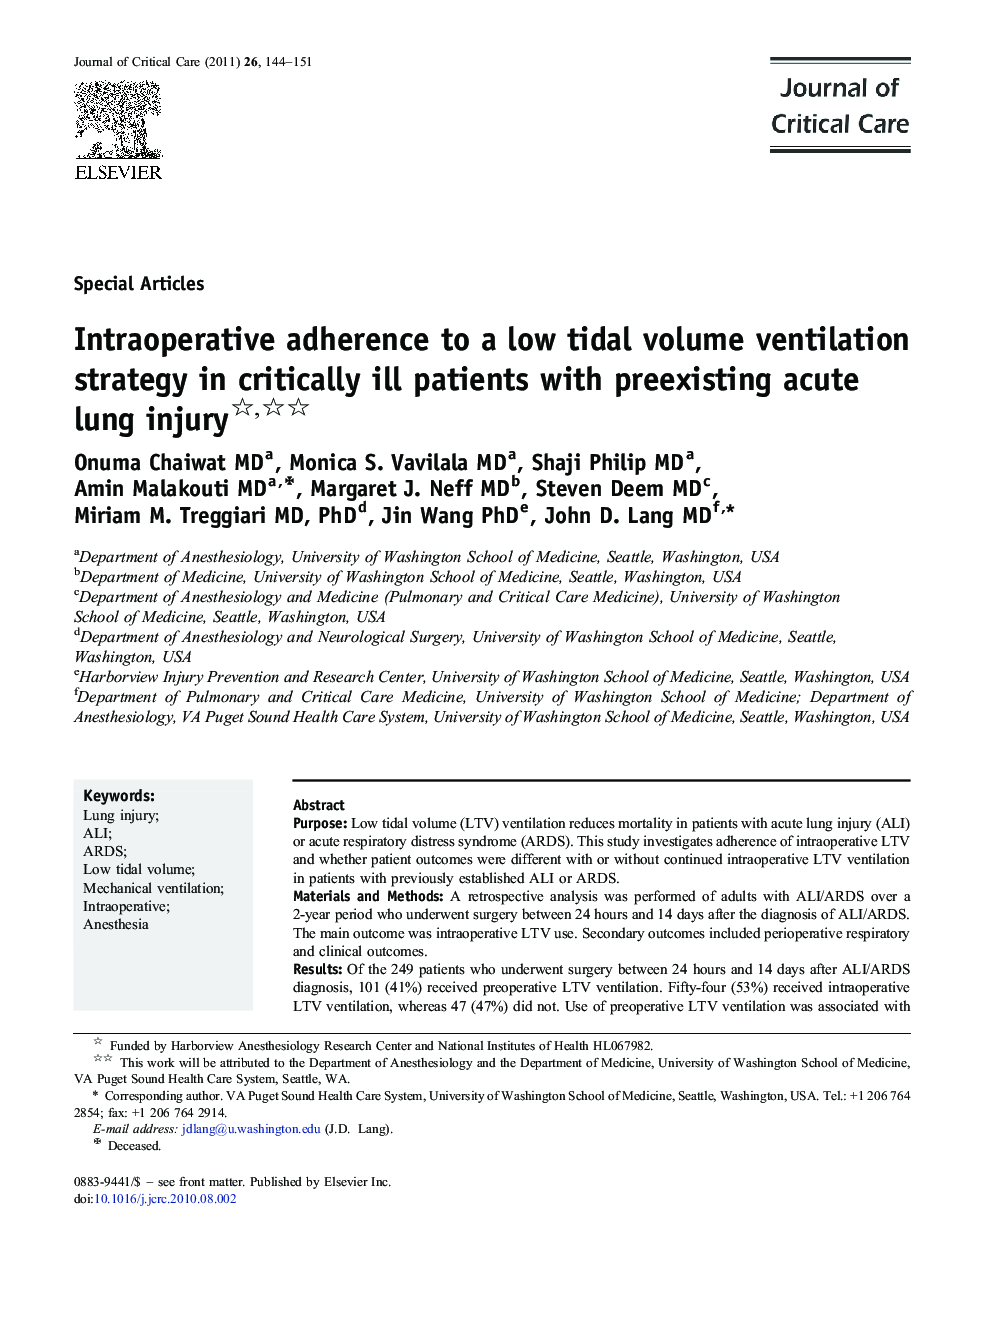 Intraoperative adherence to a low tidal volume ventilation strategy in critically ill patients with preexisting acute lung injury 